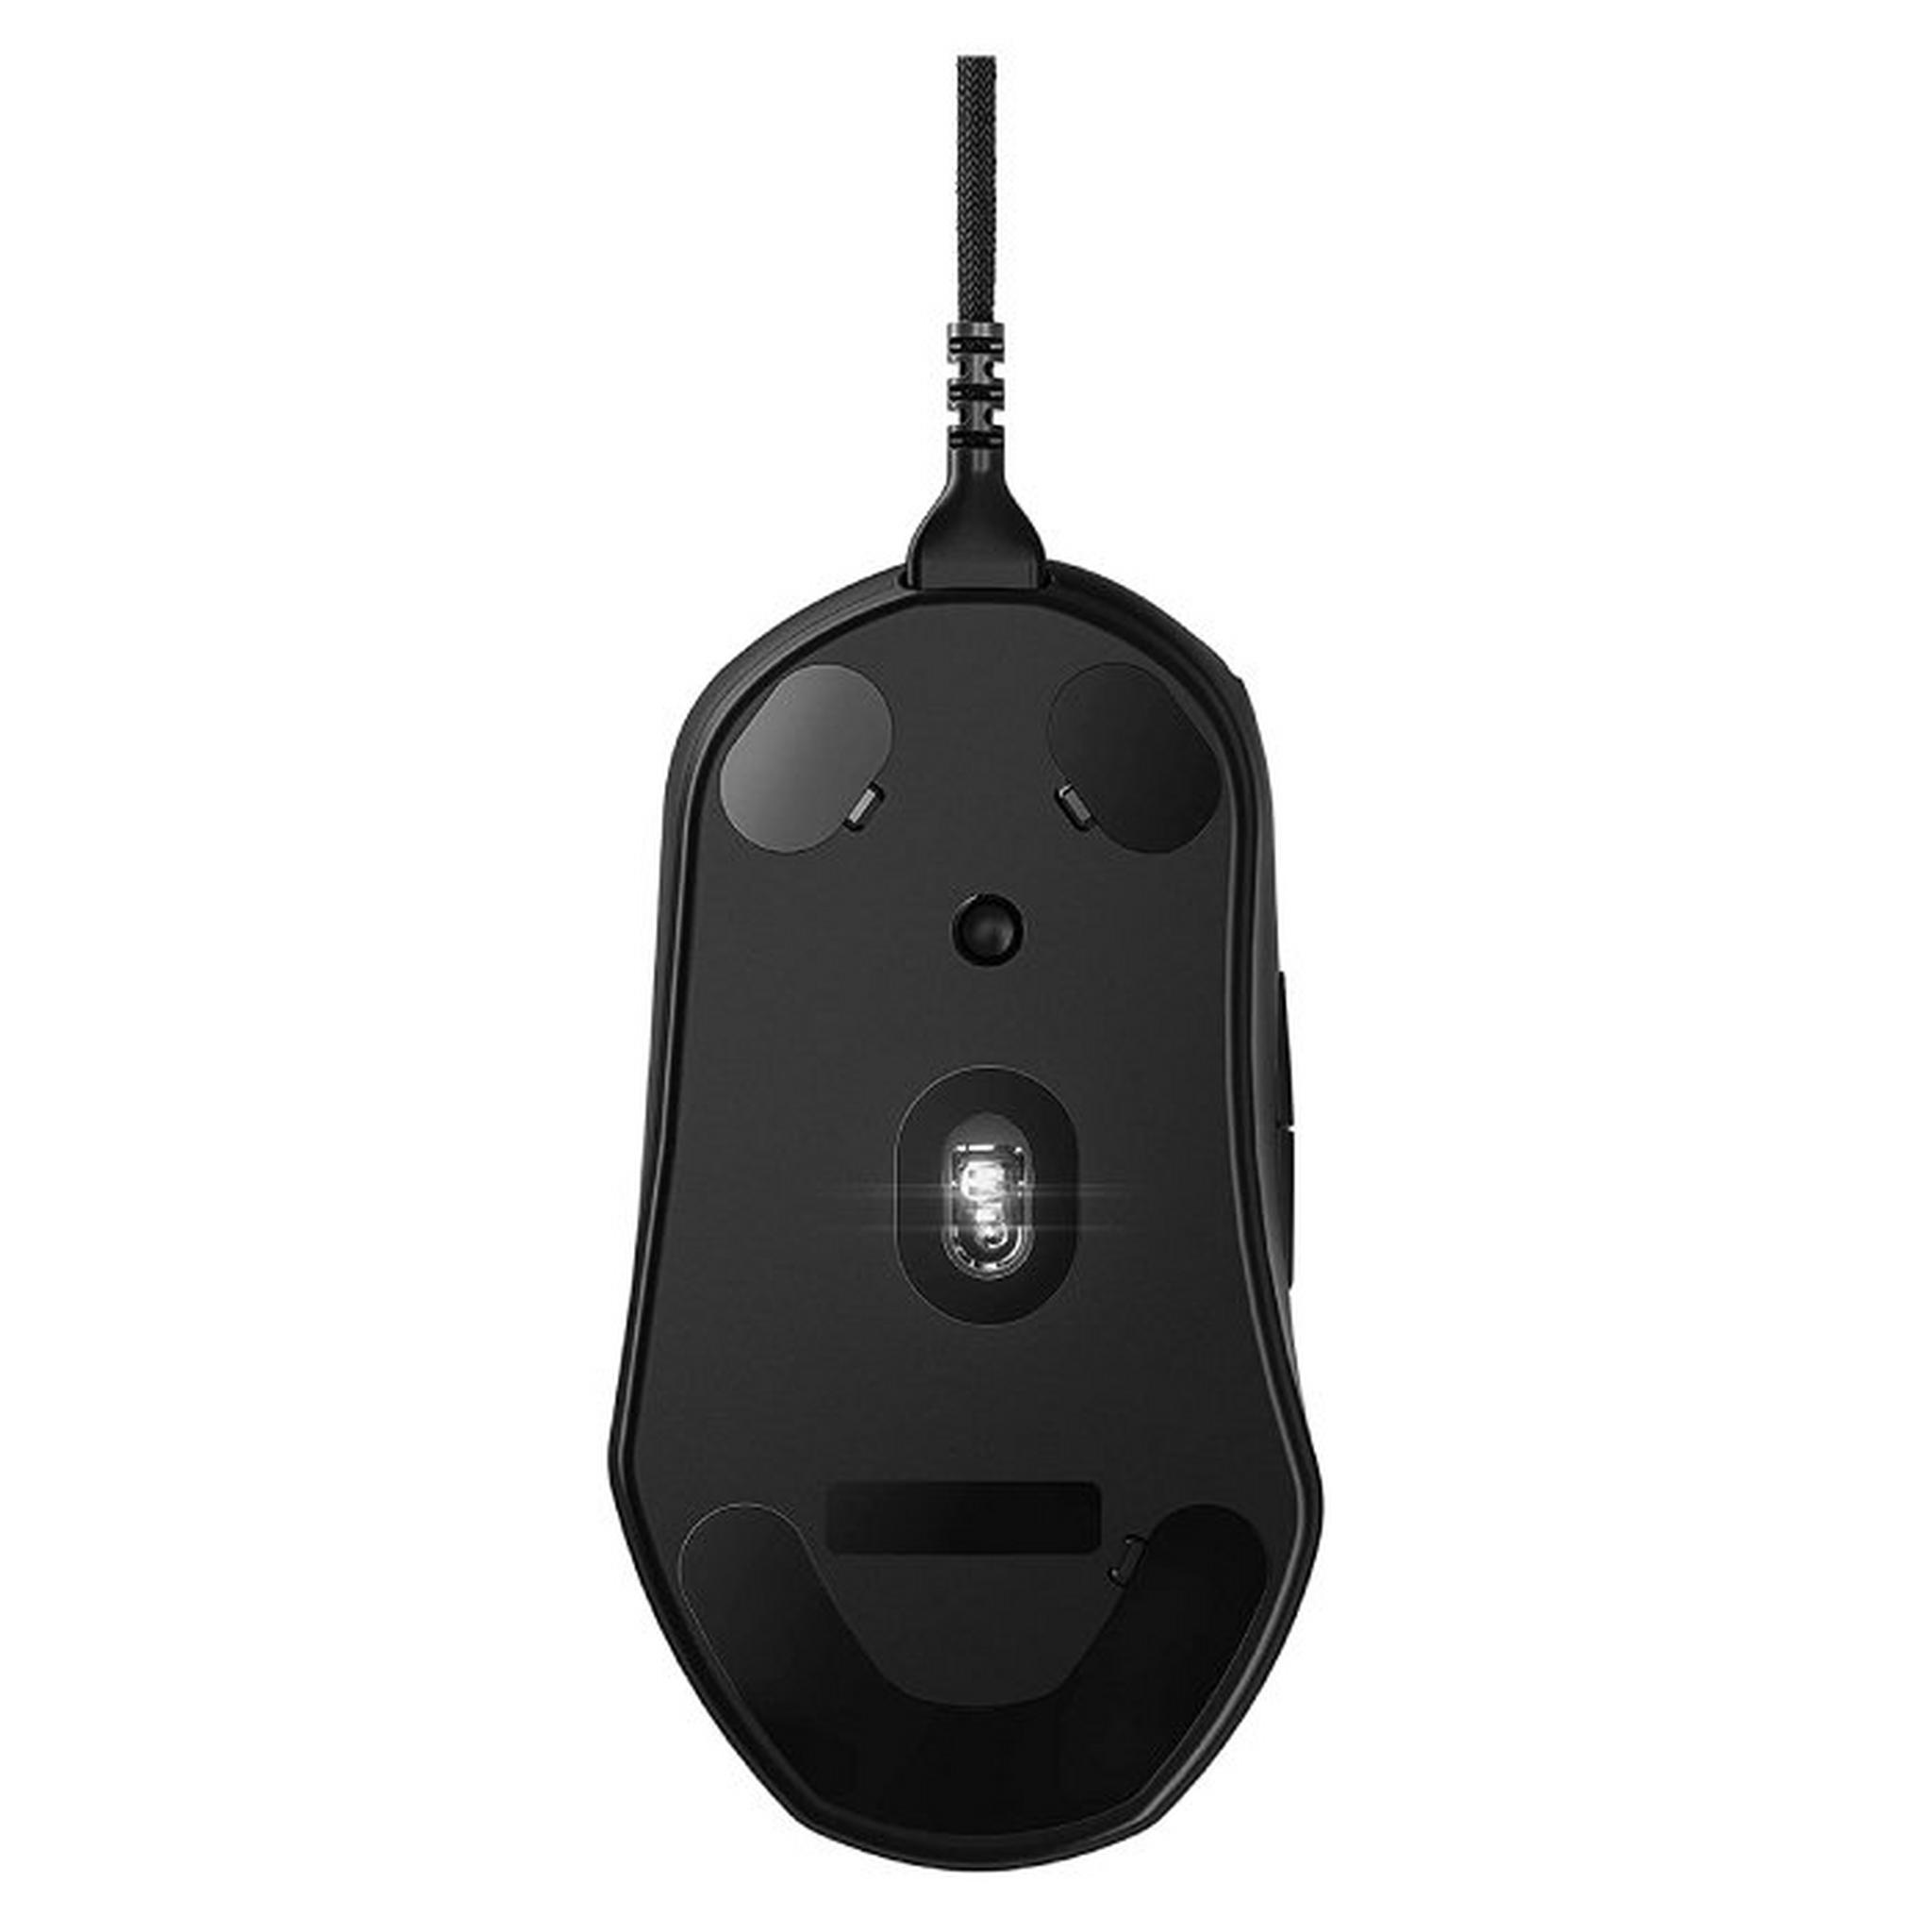 Steelseries Prime Gaming Mouse